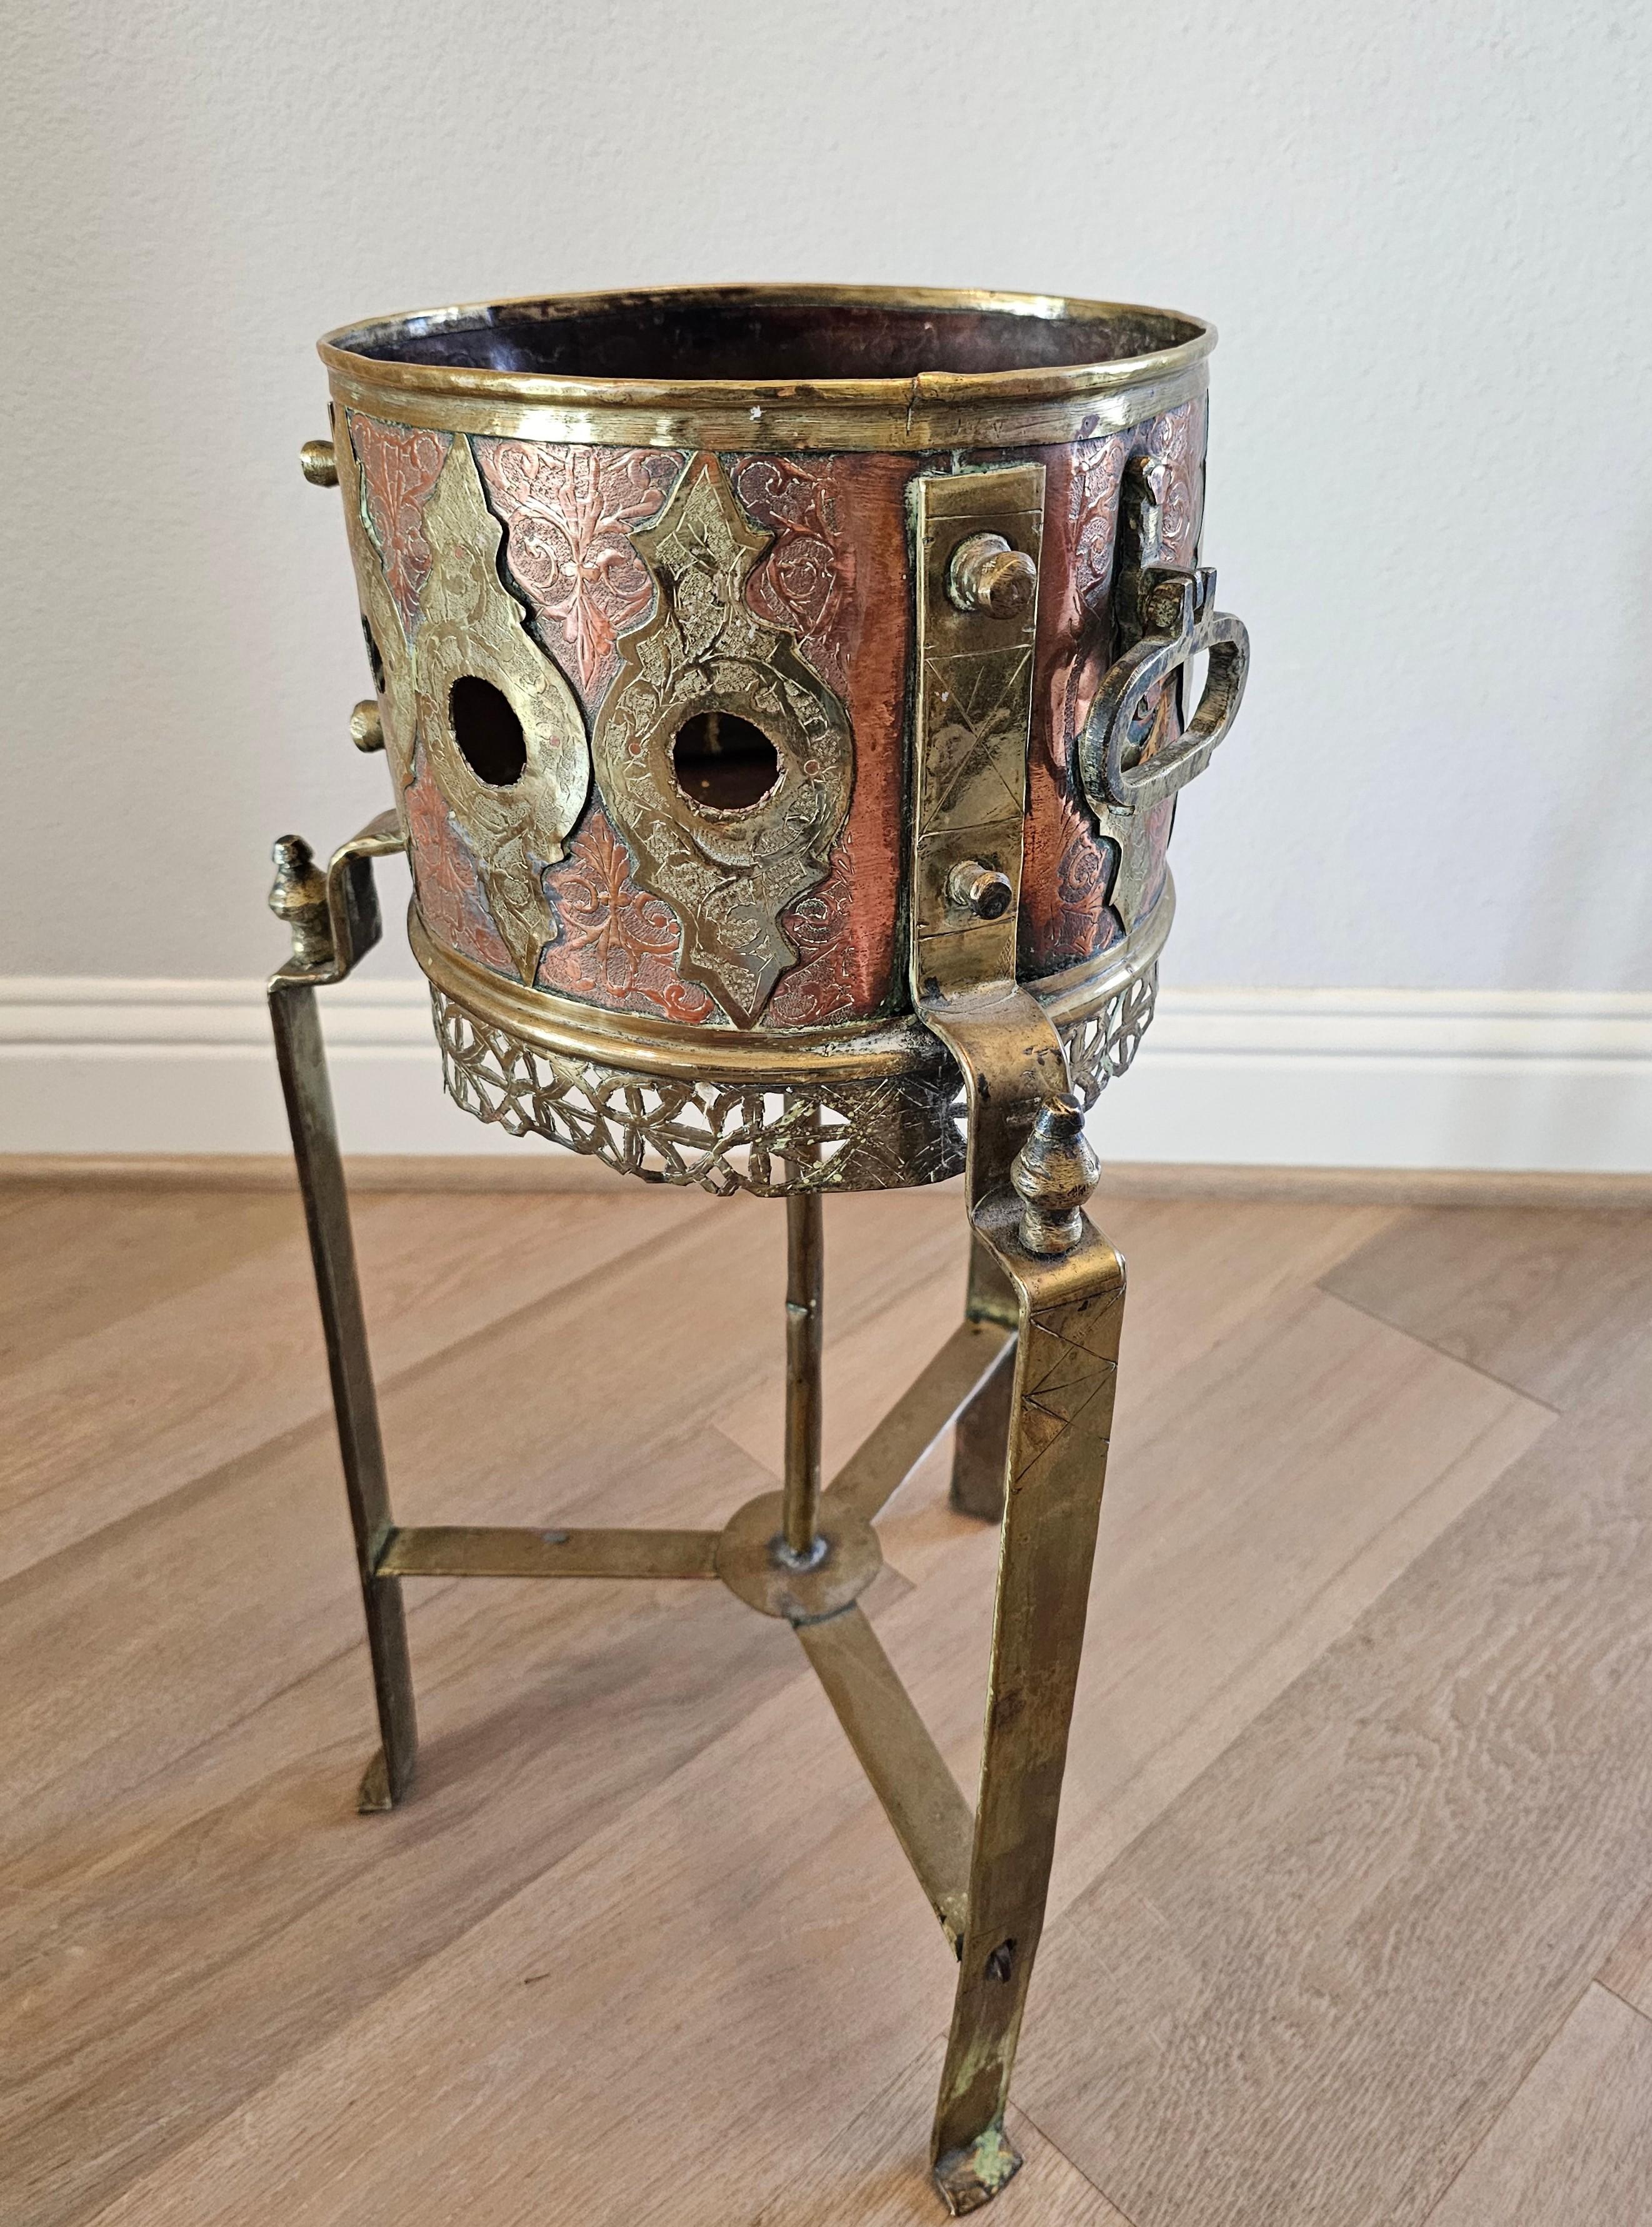 A rare, unusual, and highly decorative antique Moroccan brass, copper and bronze kettle warming stand - brazier (today it would make for fascinating candle or plant stand, fireplace kindling holder, wine cooler ice bucket stand, glass top table or